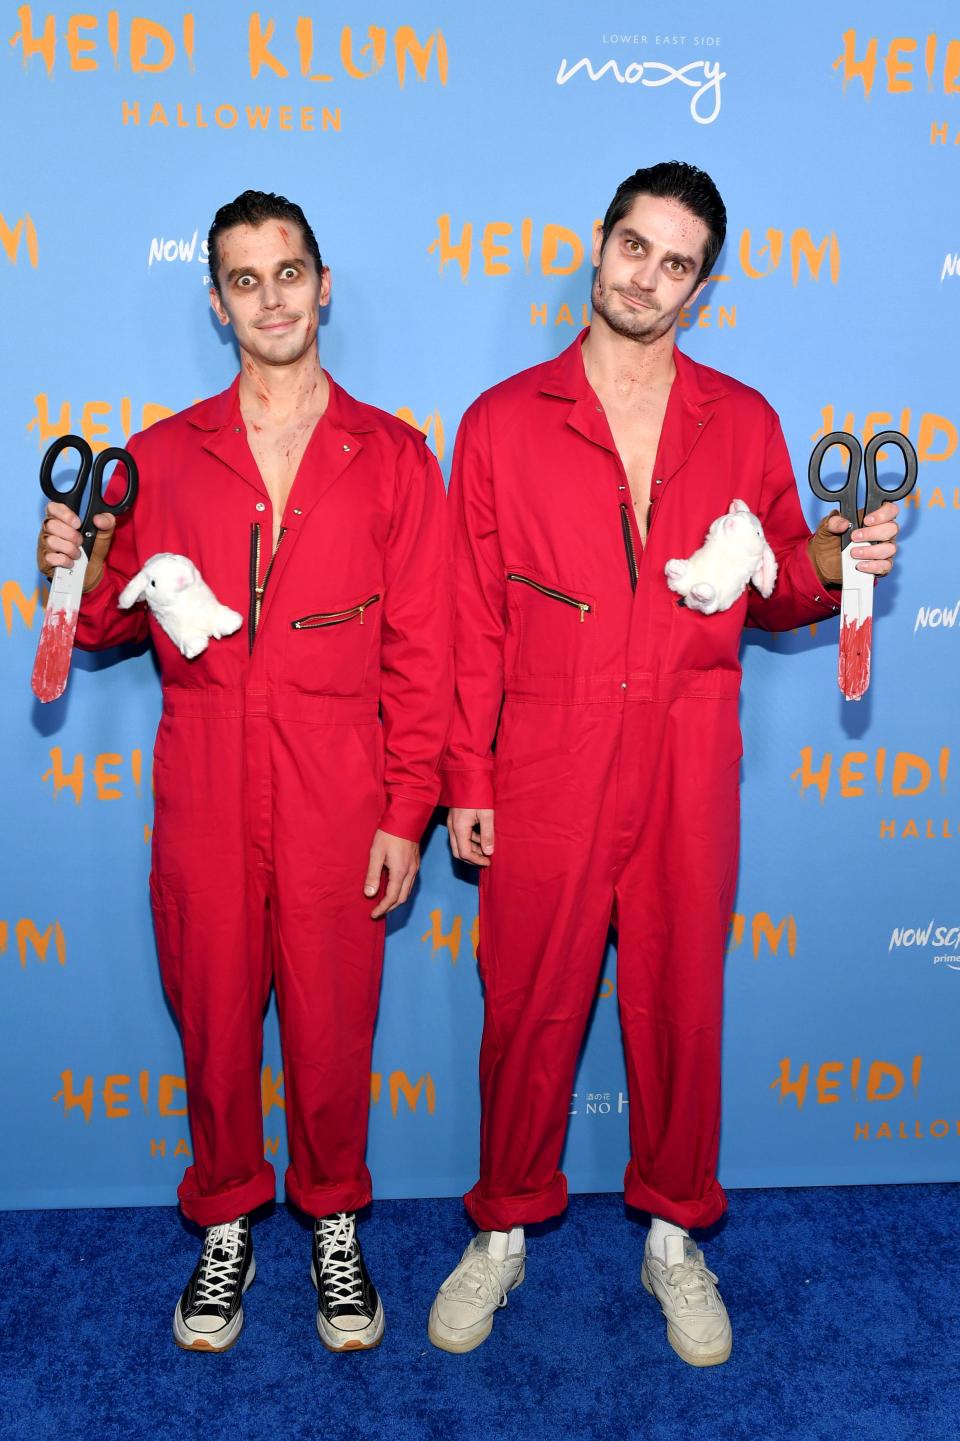 Antoni Porowski and Kevin Harrington dressed as characters for horror film "Us" for Heidi Klum's annual Halloween party